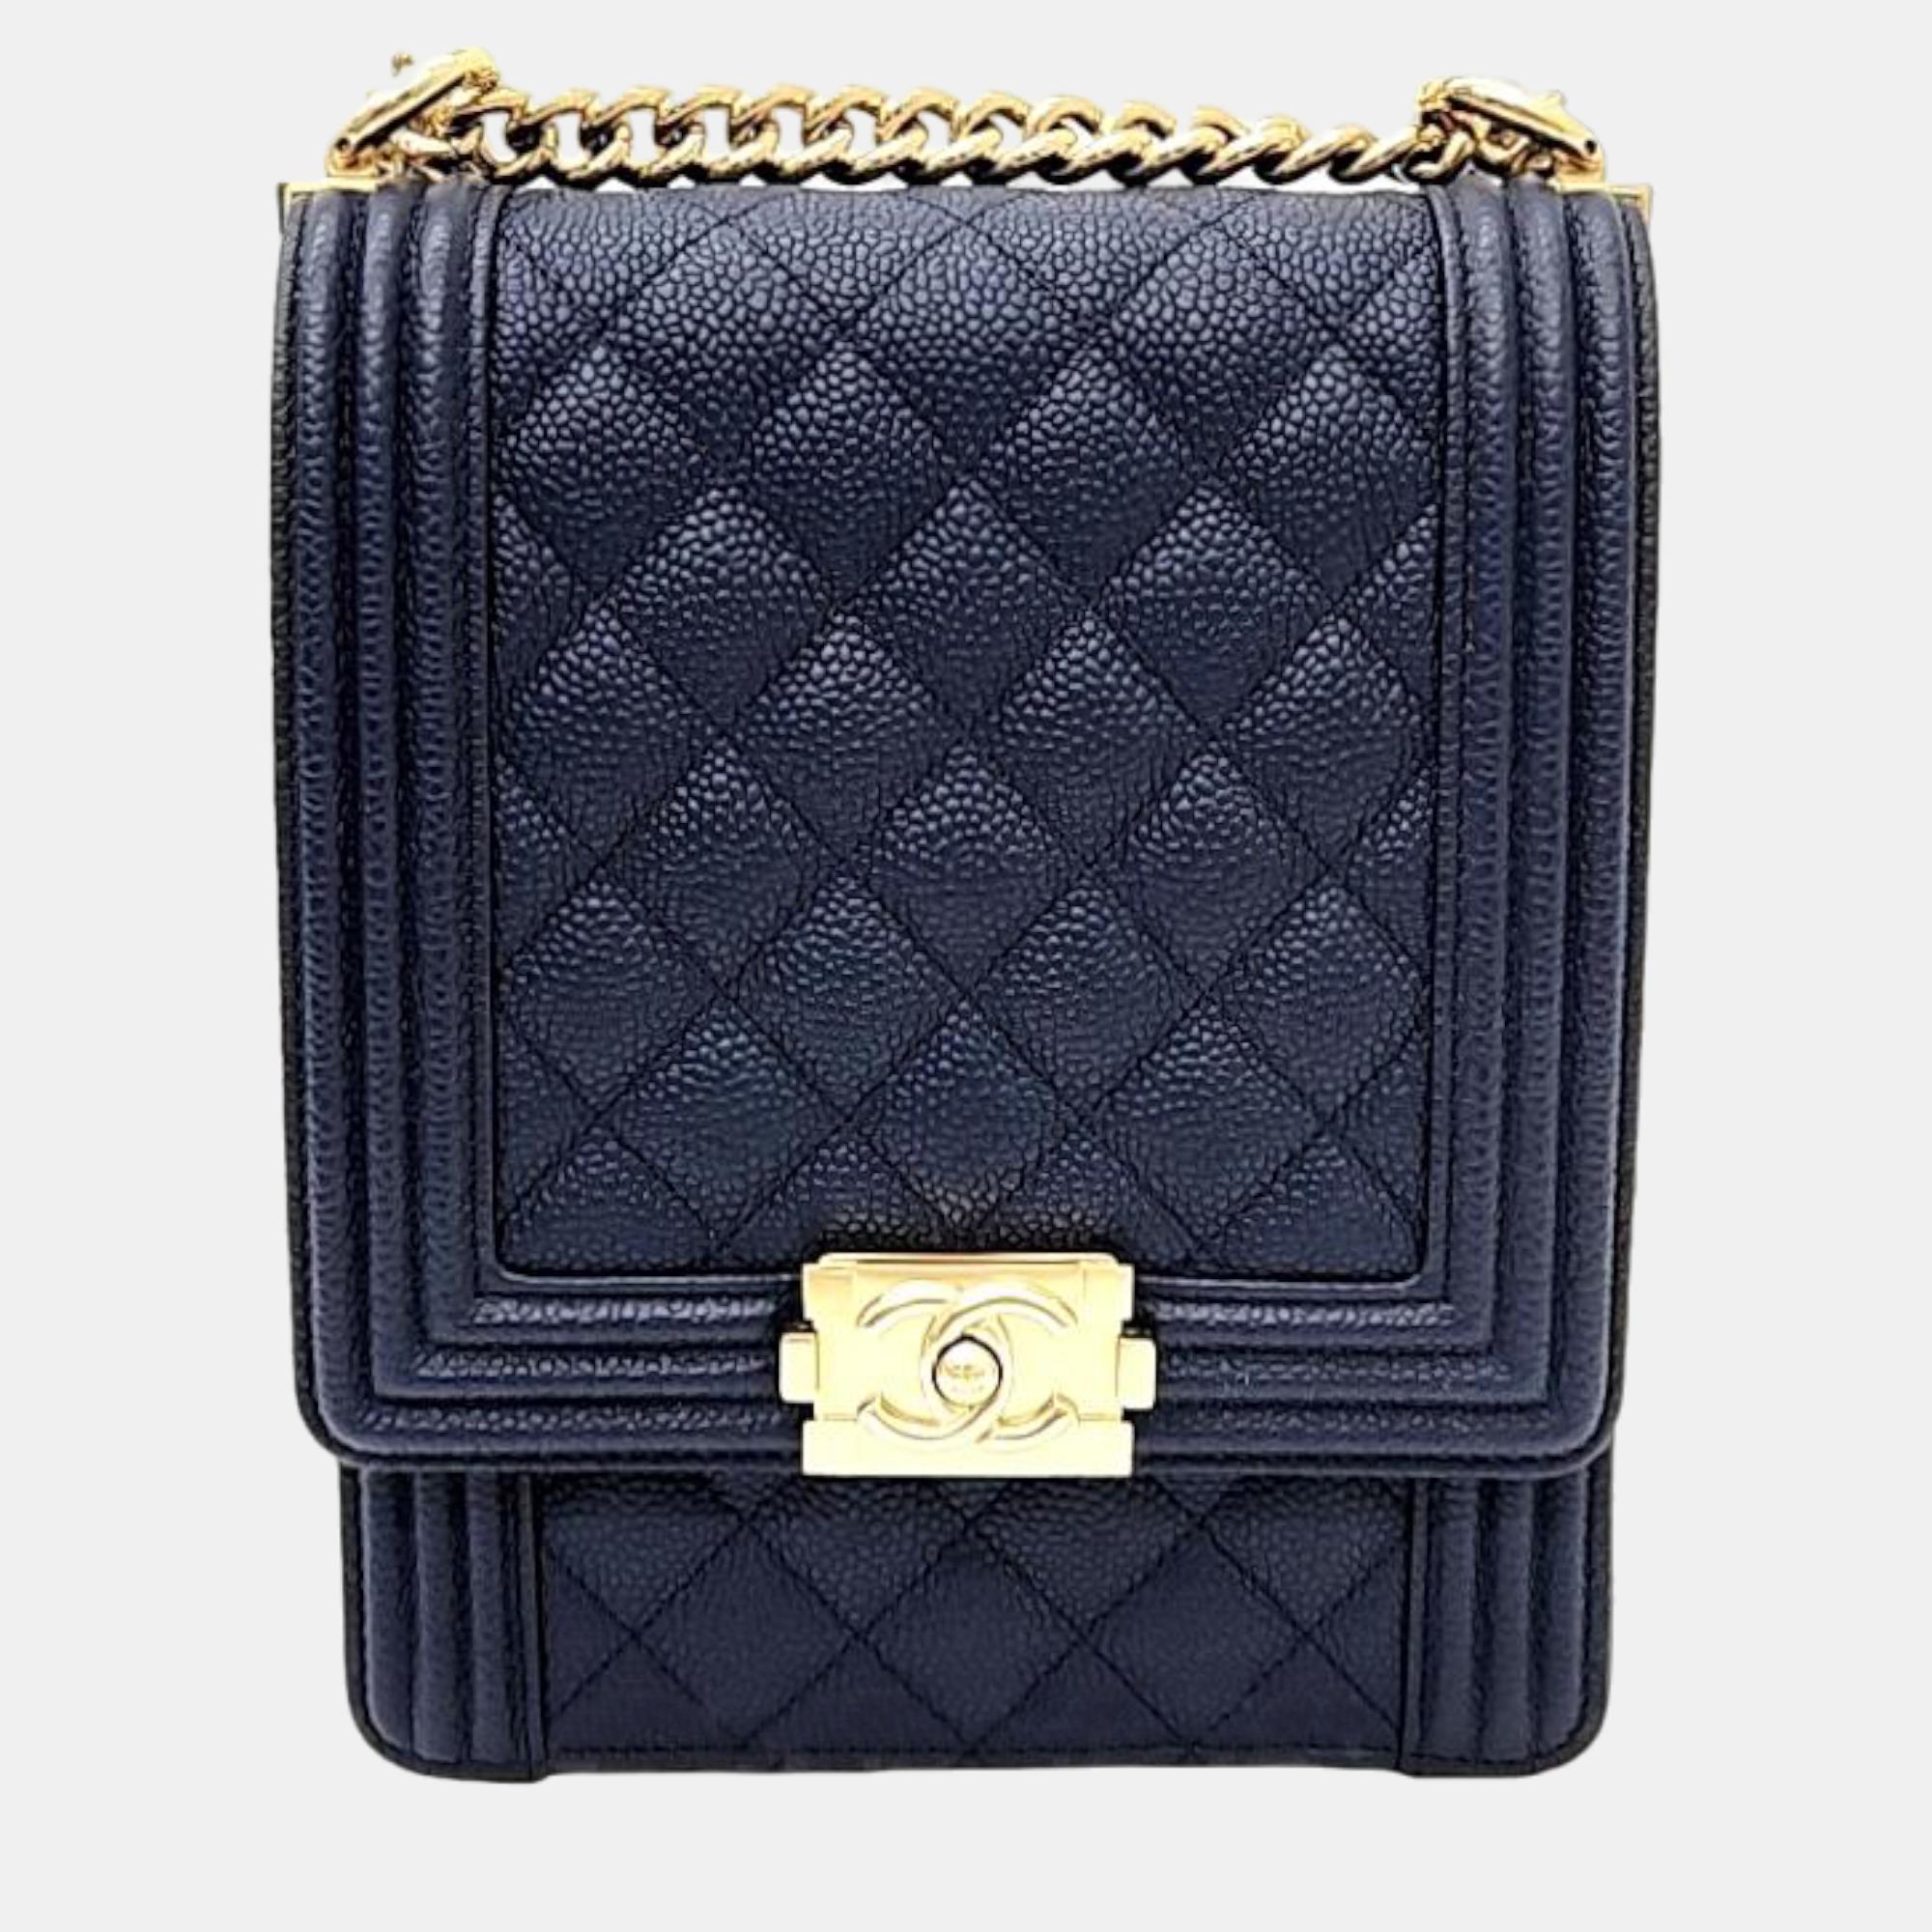 Chanel navy blue caviar leather north/south quilted flap bag